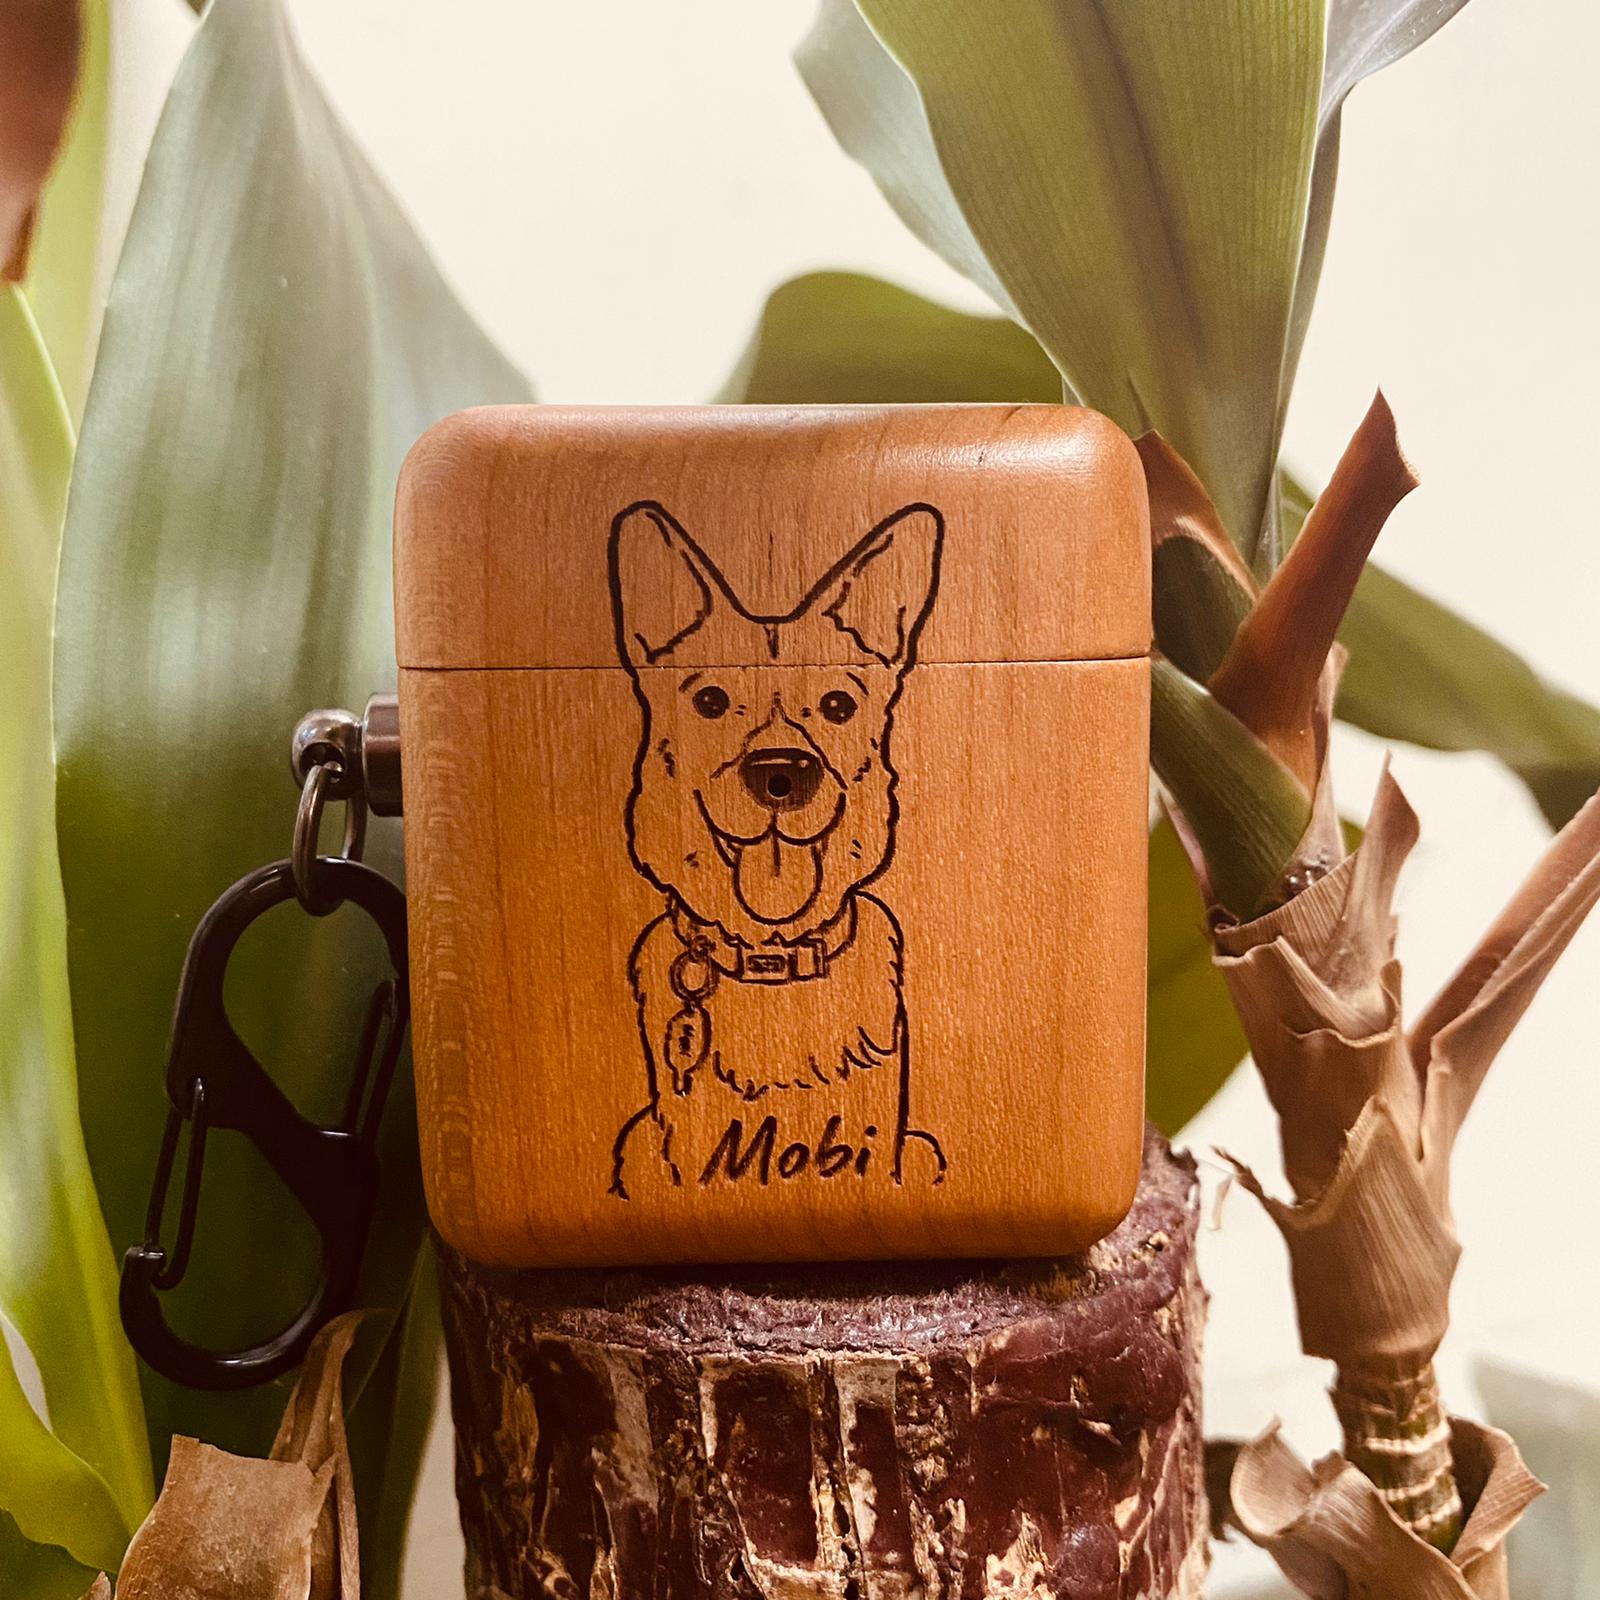 Wood Airpods 1st and 2nd Generation Case with photo engraving